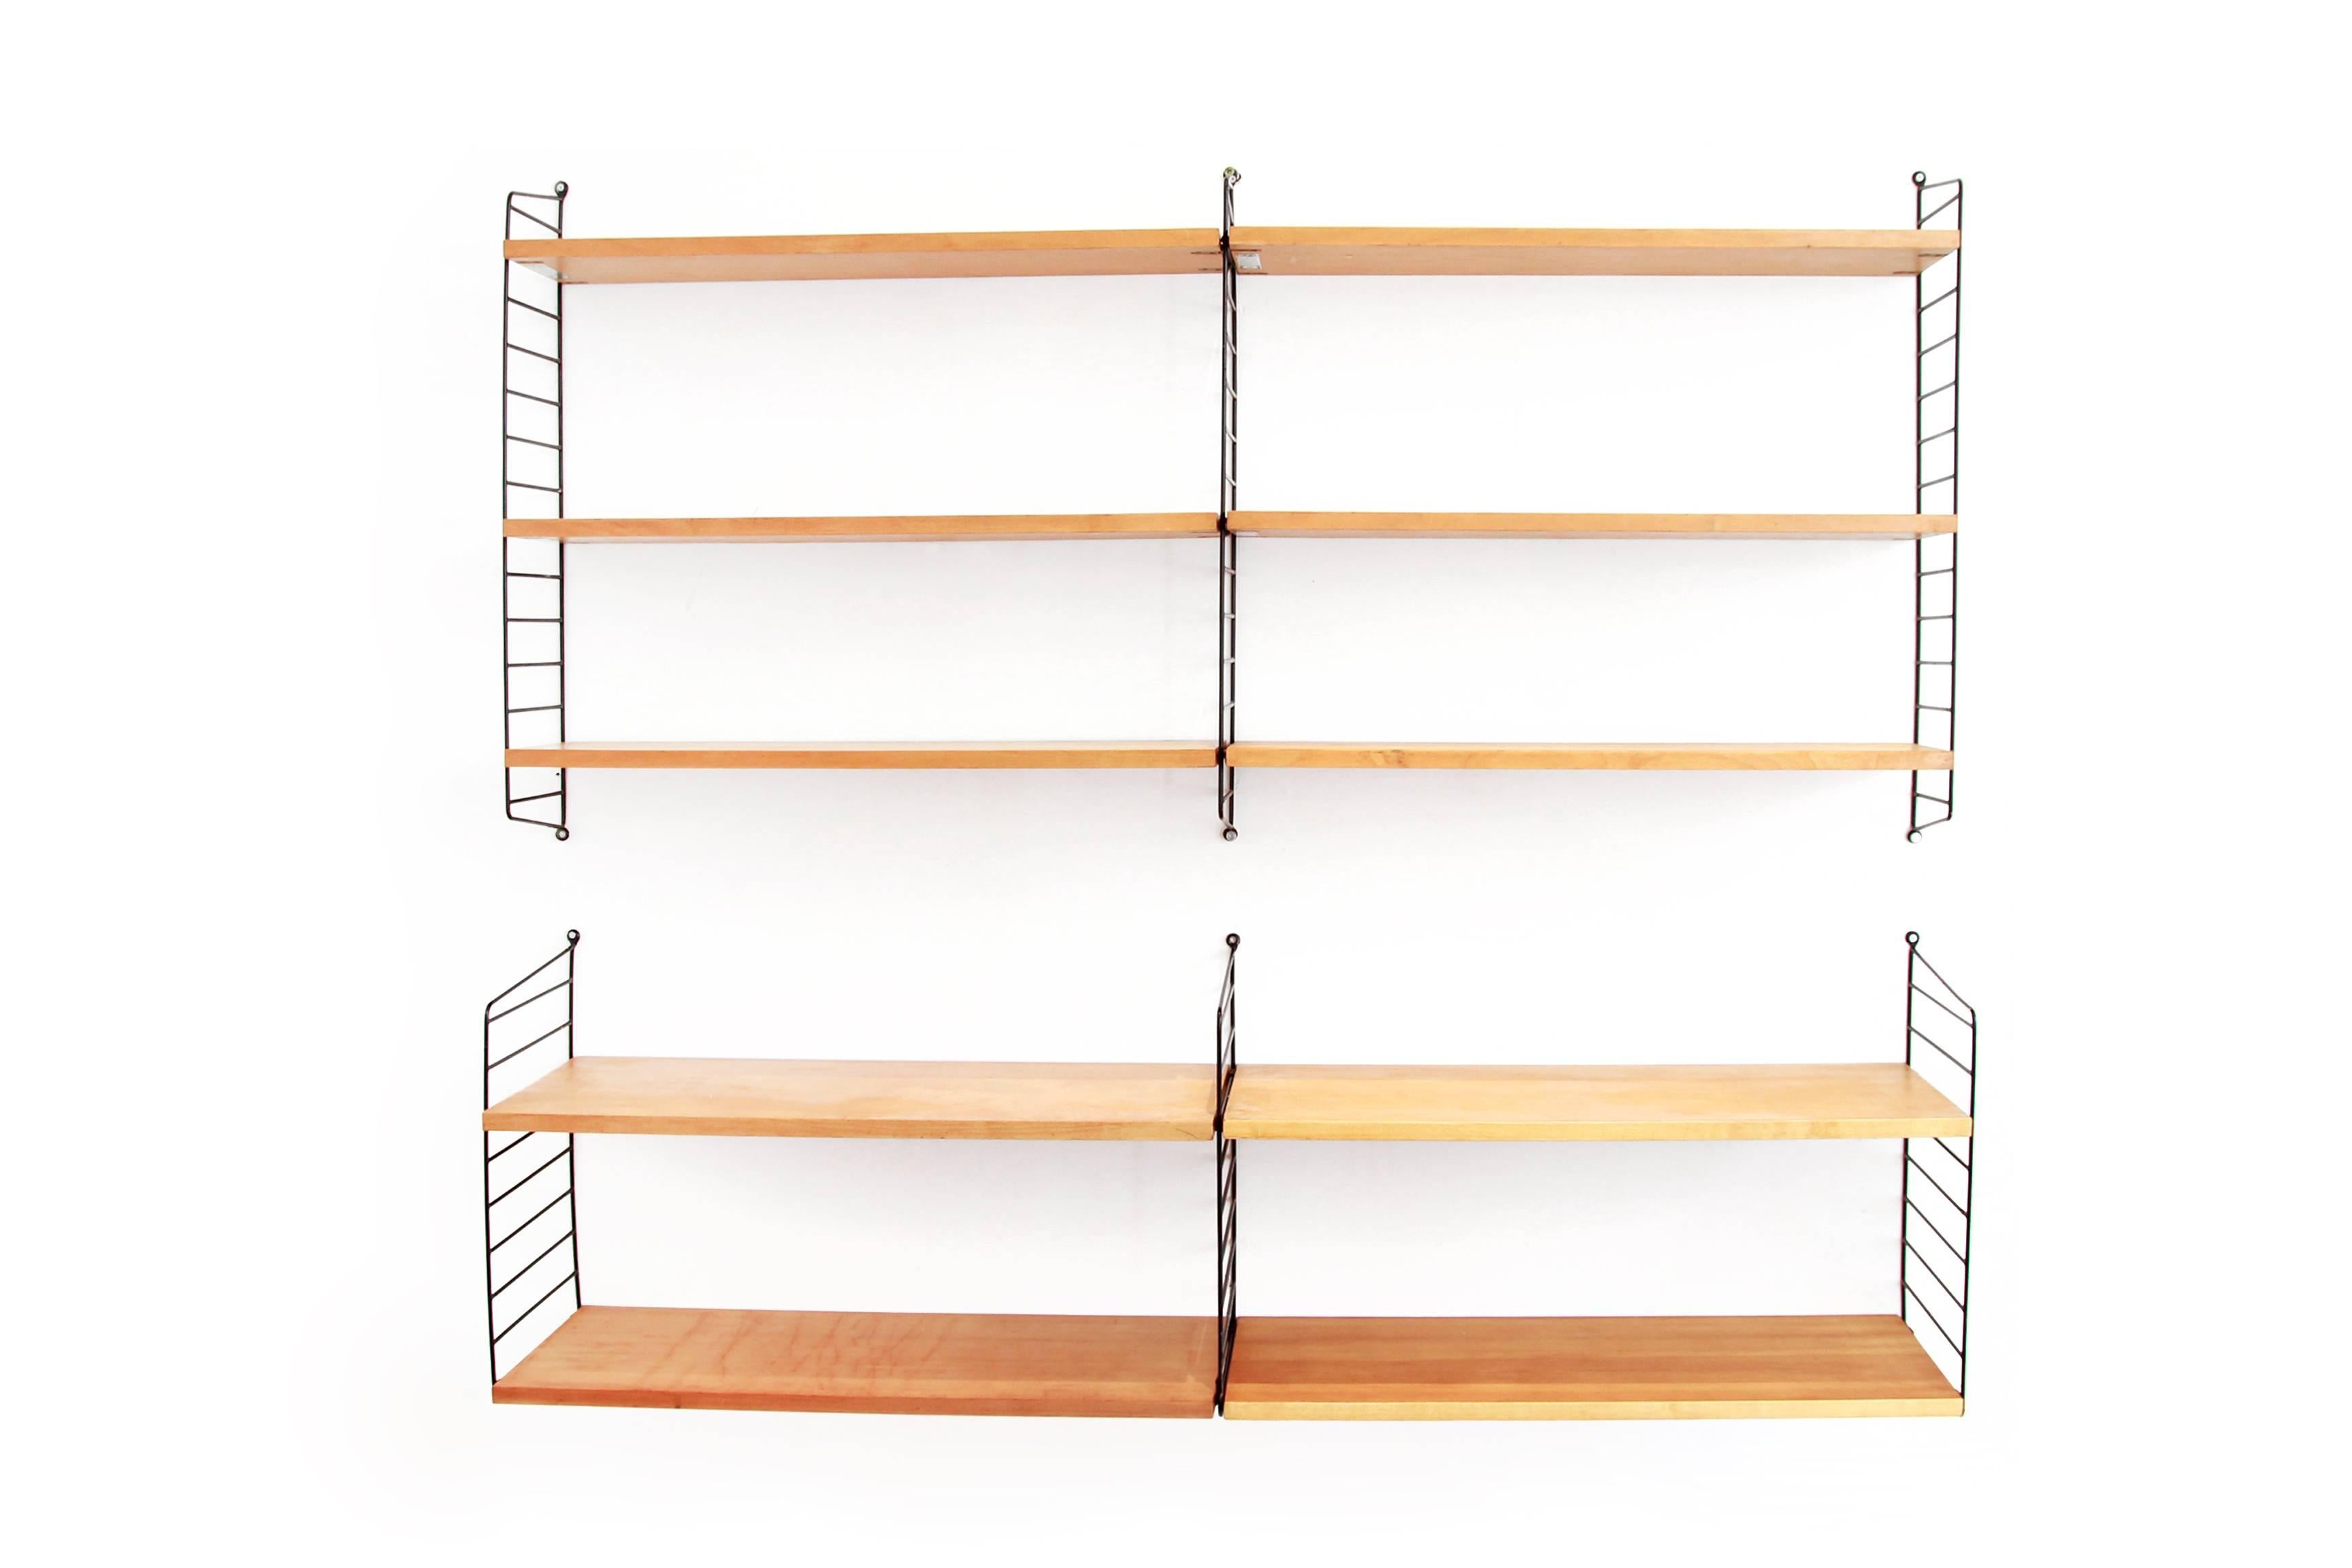 Beautiful string wall unit designed by Nils Nisse Strinning. The shelves are made of pine veneer and are 78 cm wide. This set consists of three normal sized black ladders and three deep ladders, six shelves of 20 cm deep and four shelves of 30 cm